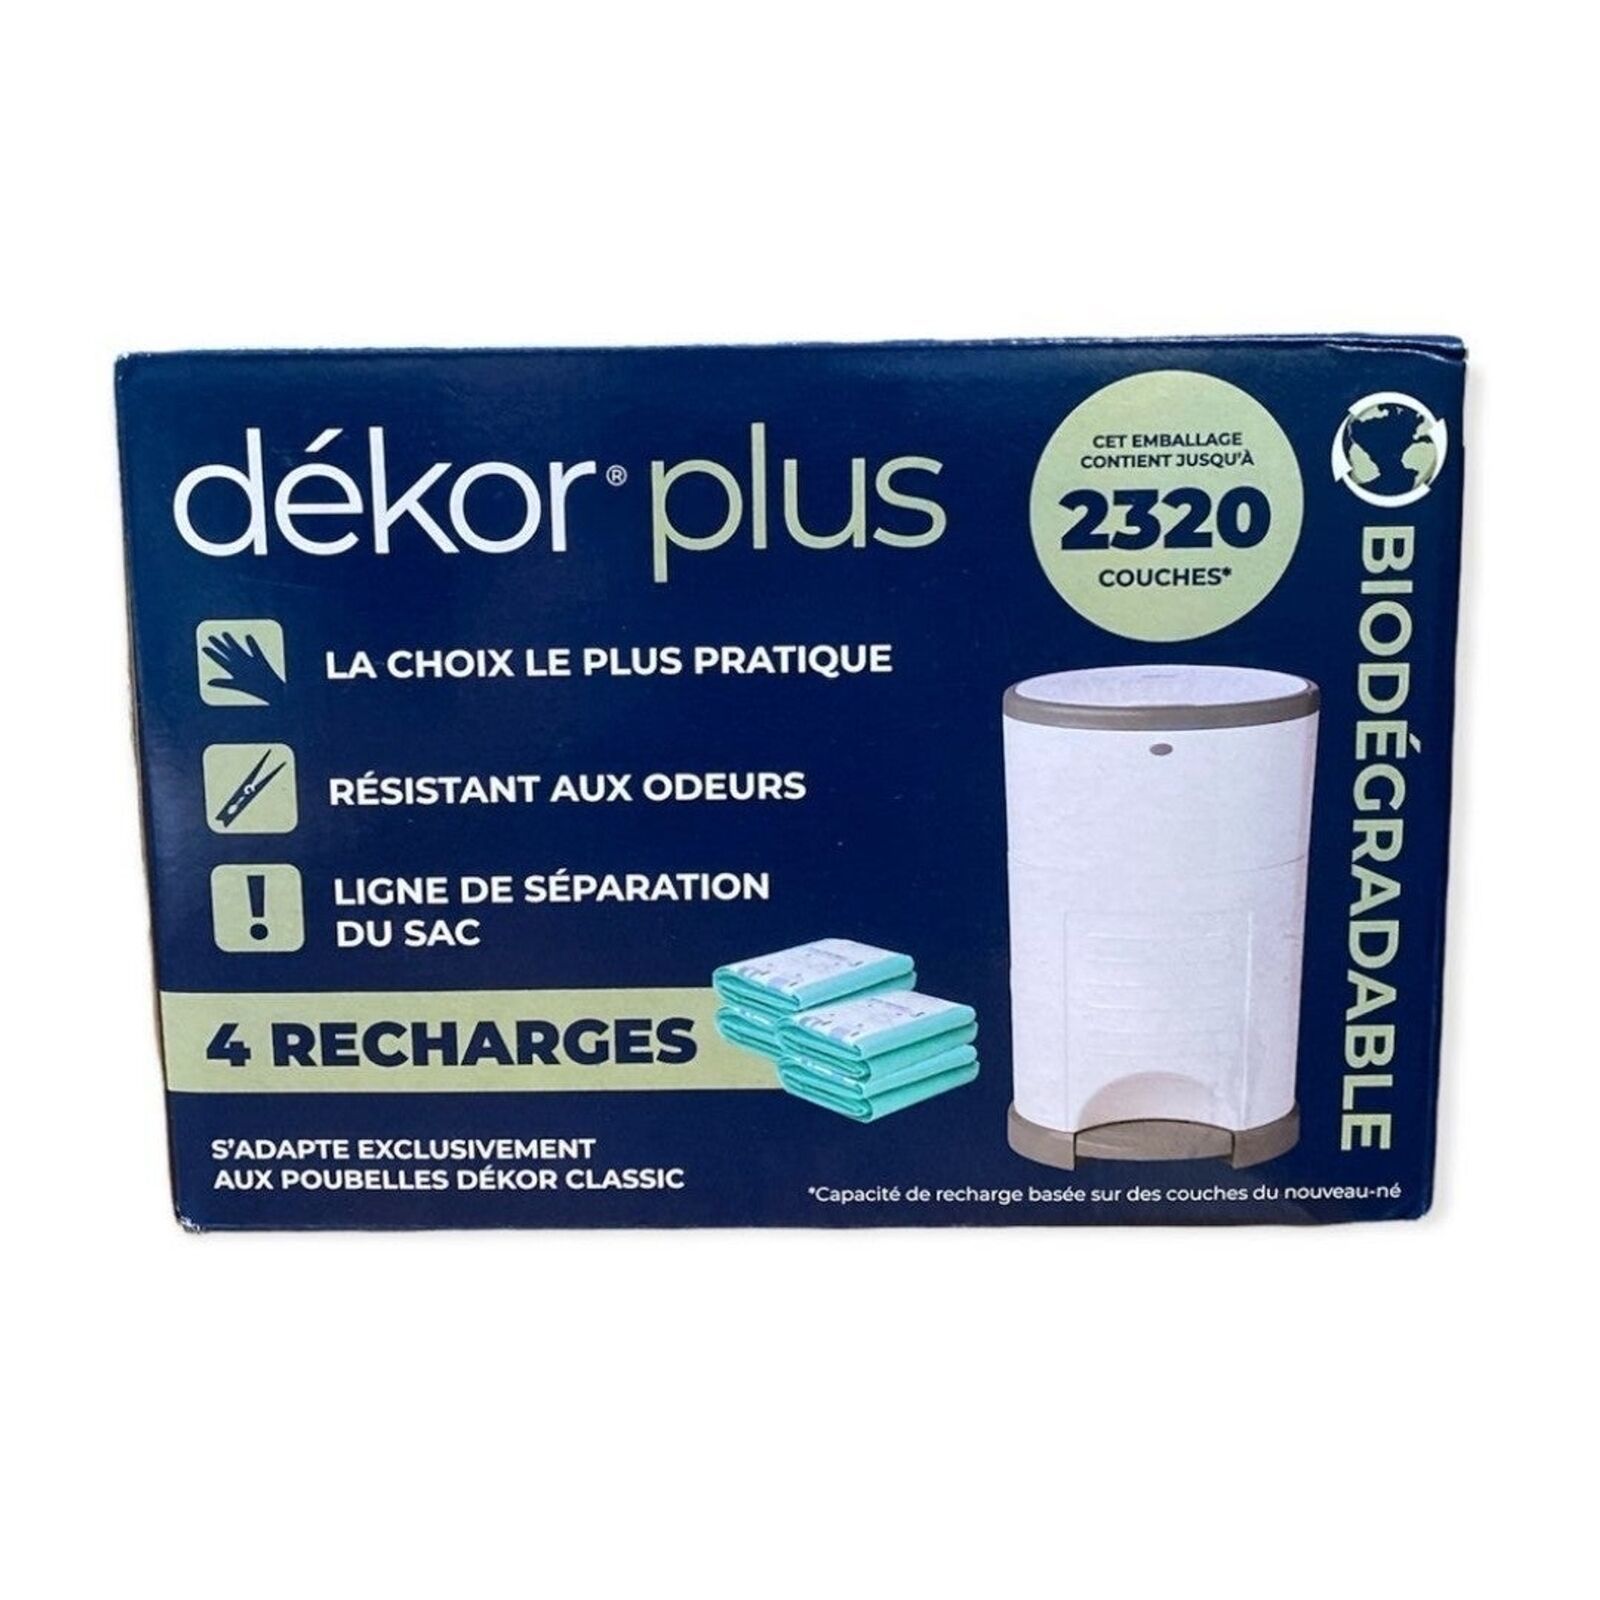 Primary image for (2) Dekor Plus Diaper Pail Biodegradable 4 Refills - holds up to 2320 diapers